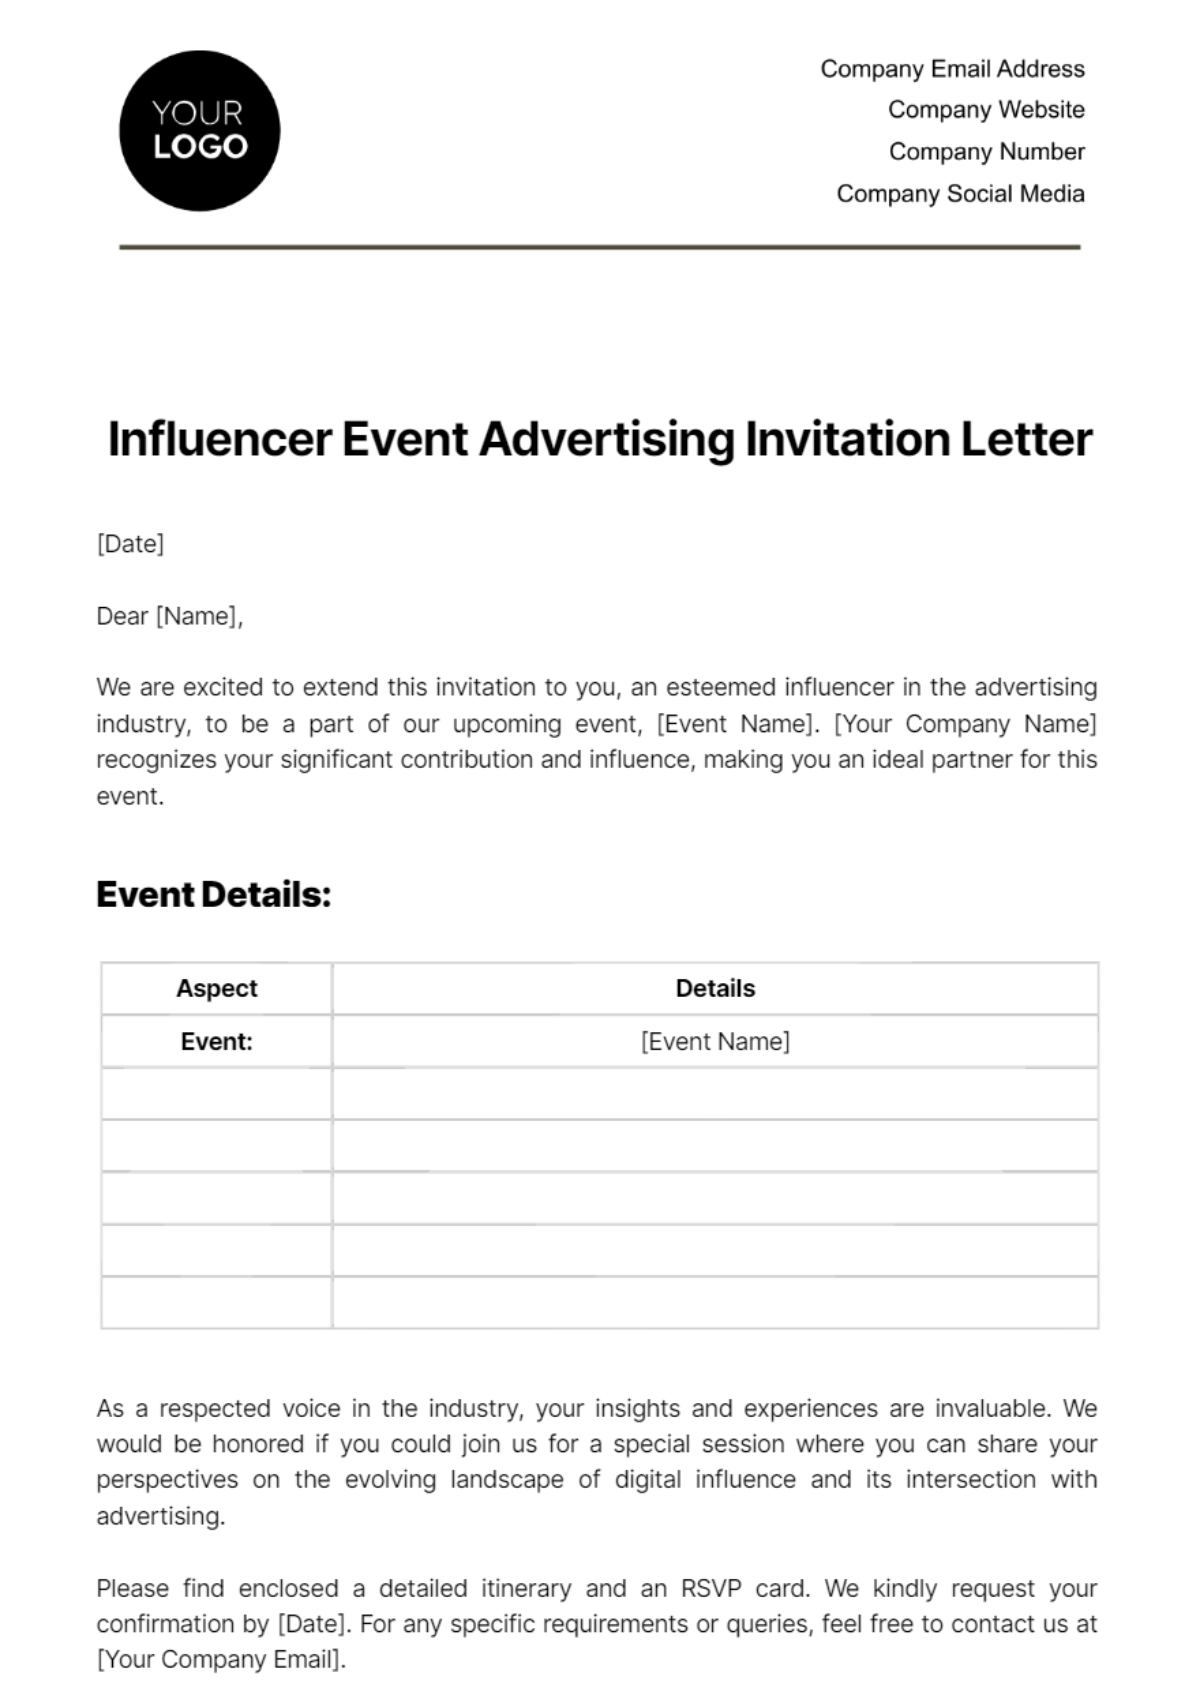 Free Influencer Event Advertising Invitation Letter Template